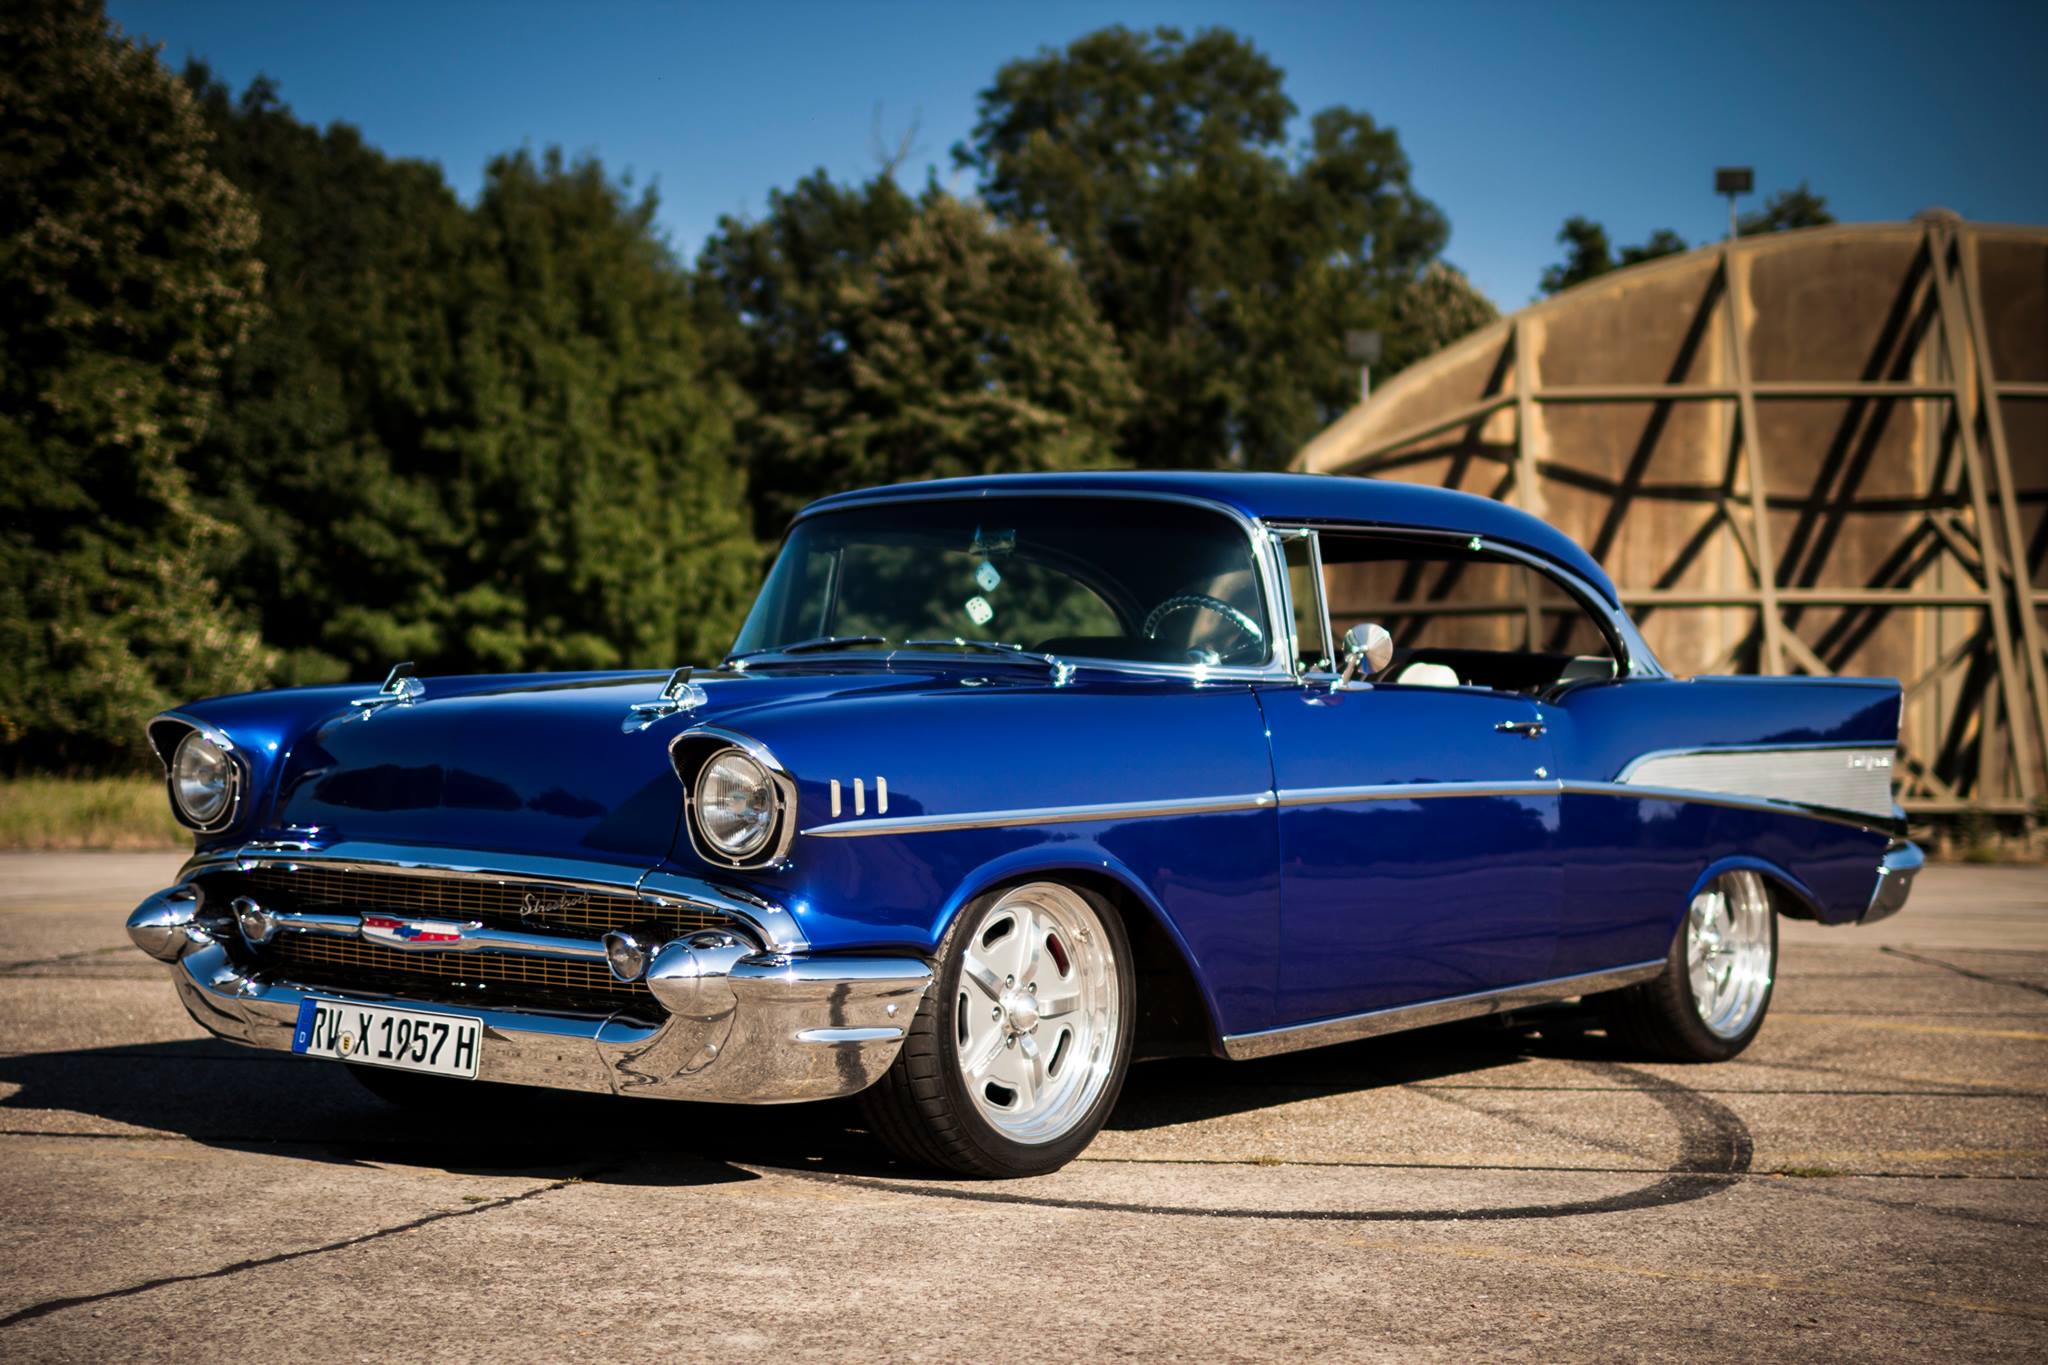 German-Built '57 Chevy Does An America Classic Proud